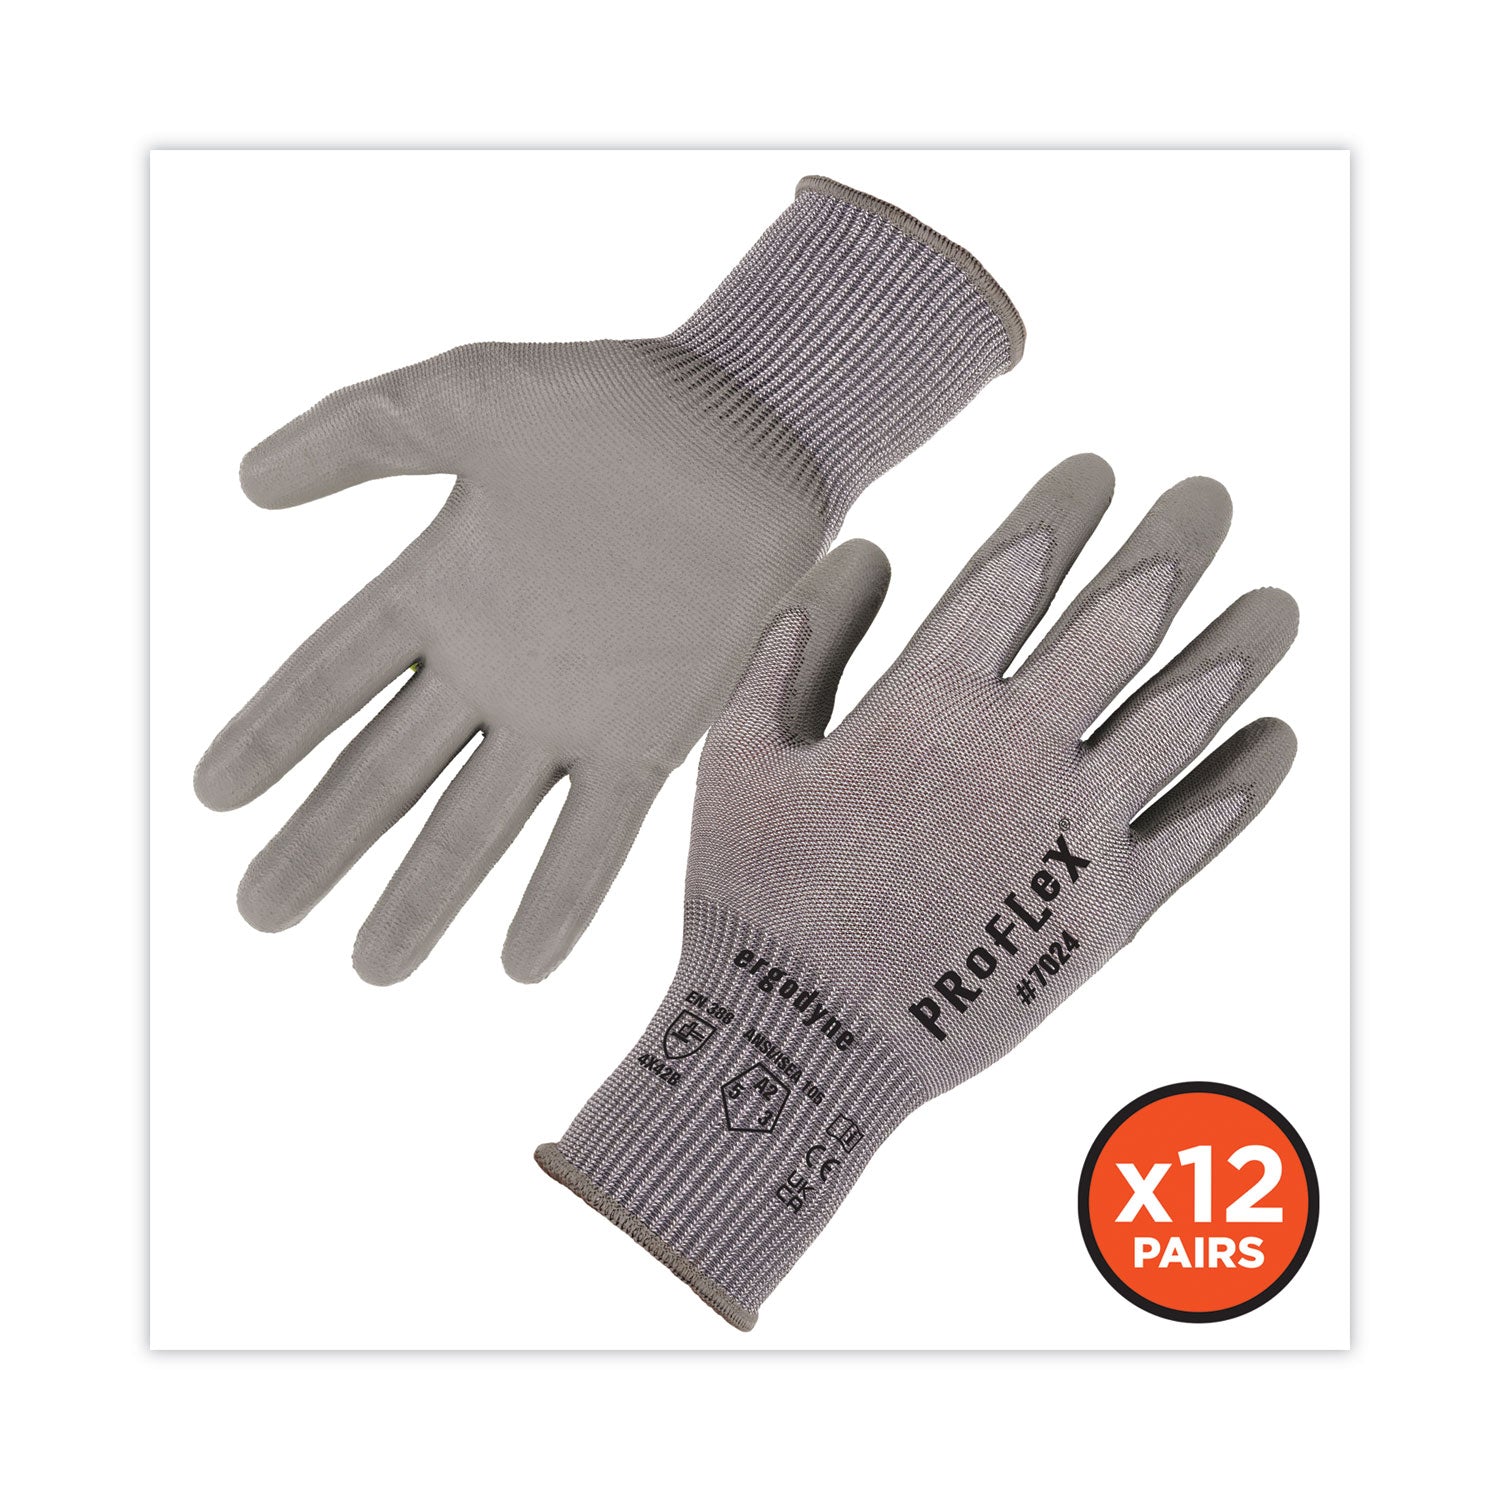 proflex-7024-ansi-a2-pu-coated-cr-gloves-gray-medium-12-pairs-pack-ships-in-1-3-business-days_ego10393 - 2